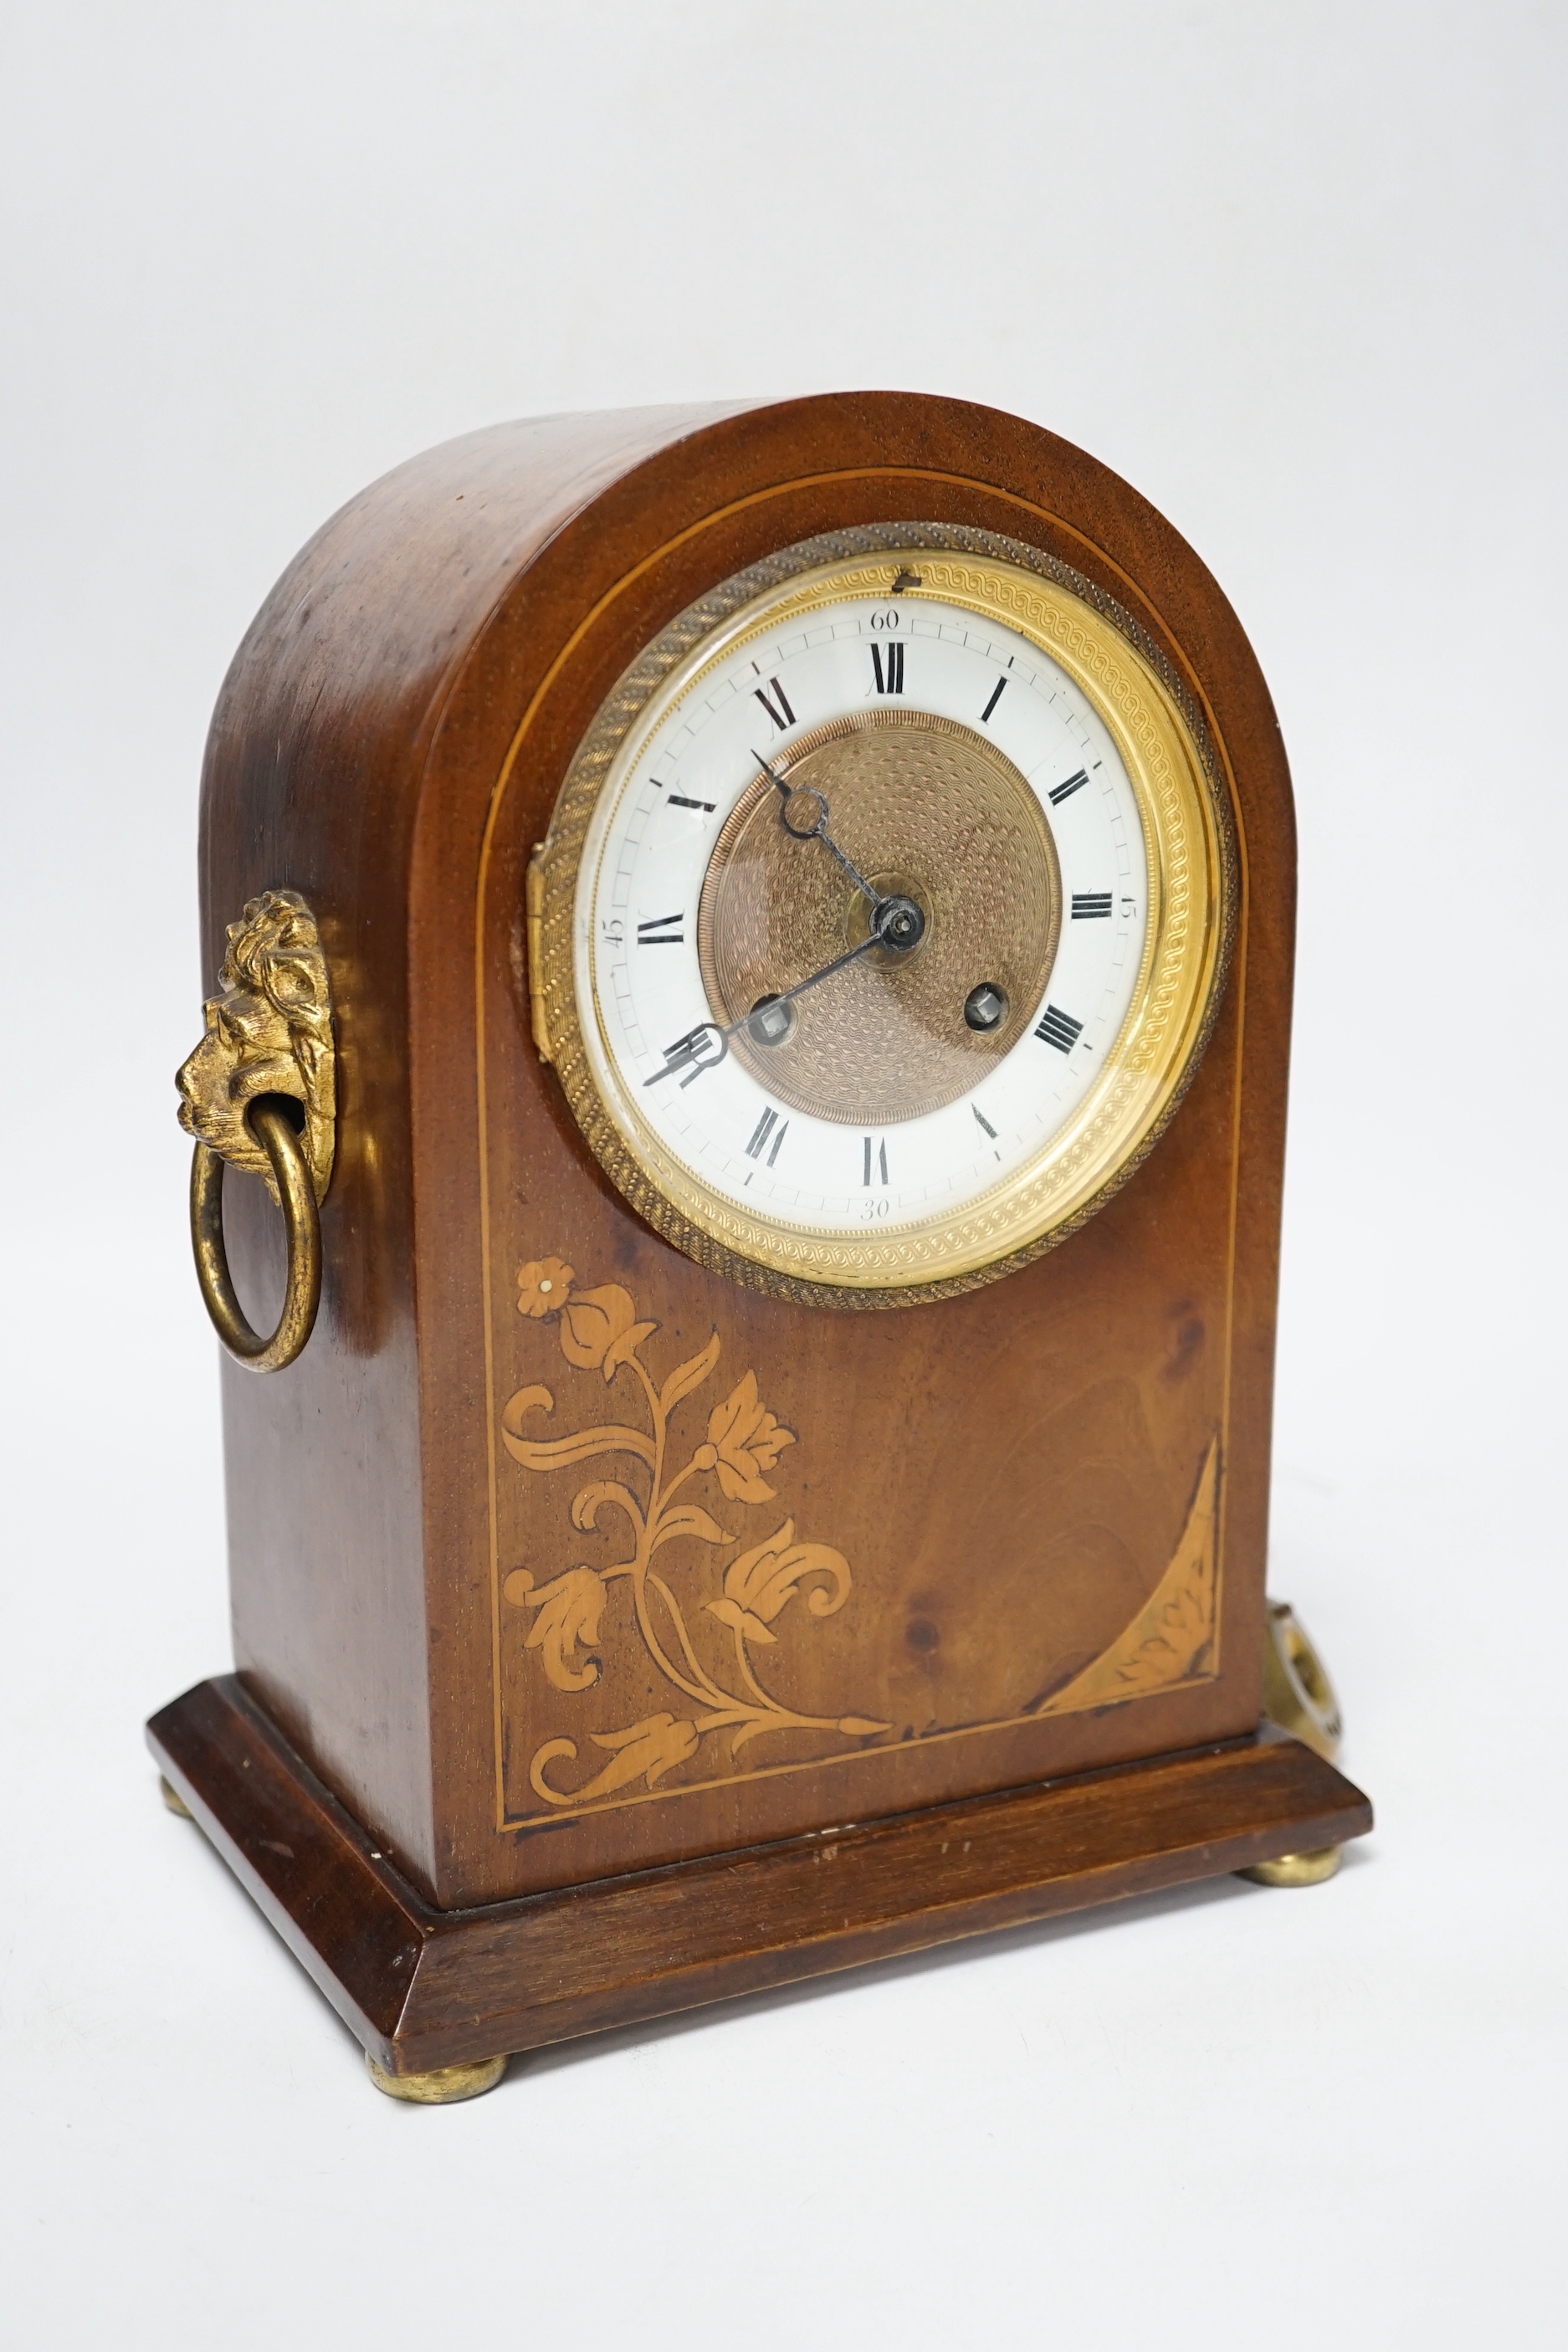 An Edwardian mahogany mantel clock, French movement striking on a coiled gong, 25cm high